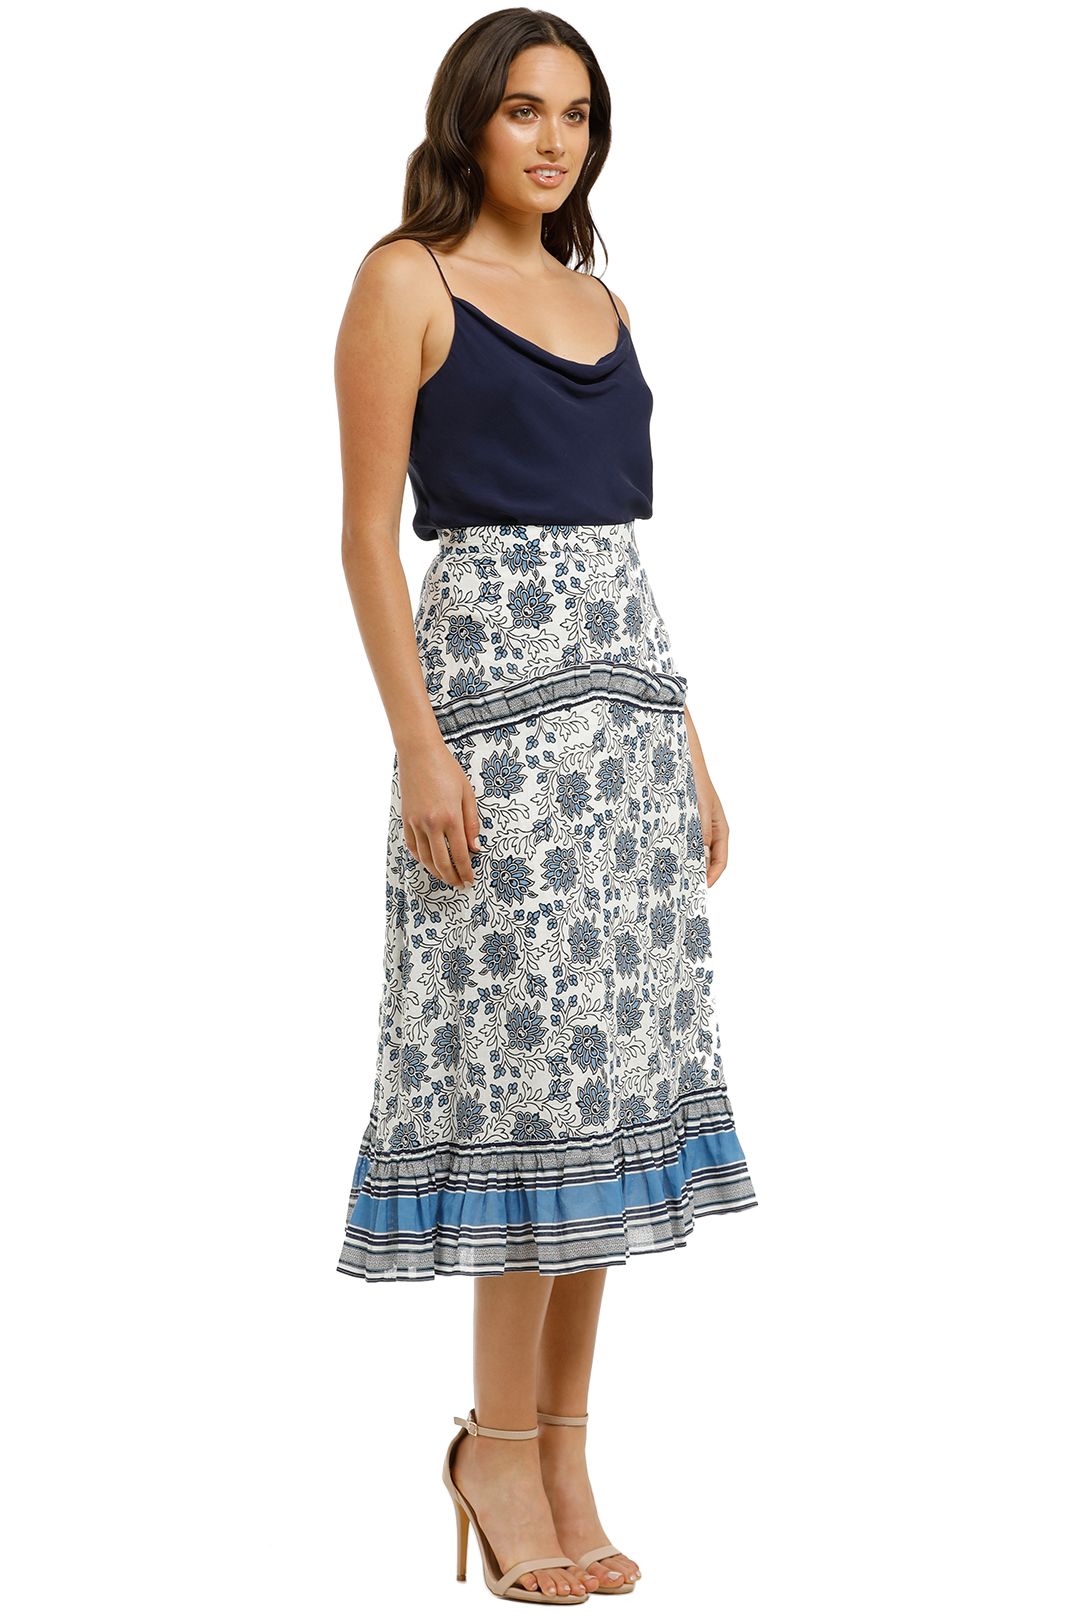 Stevie-May-These-Days-Skirt-Geo-Stripe-Side